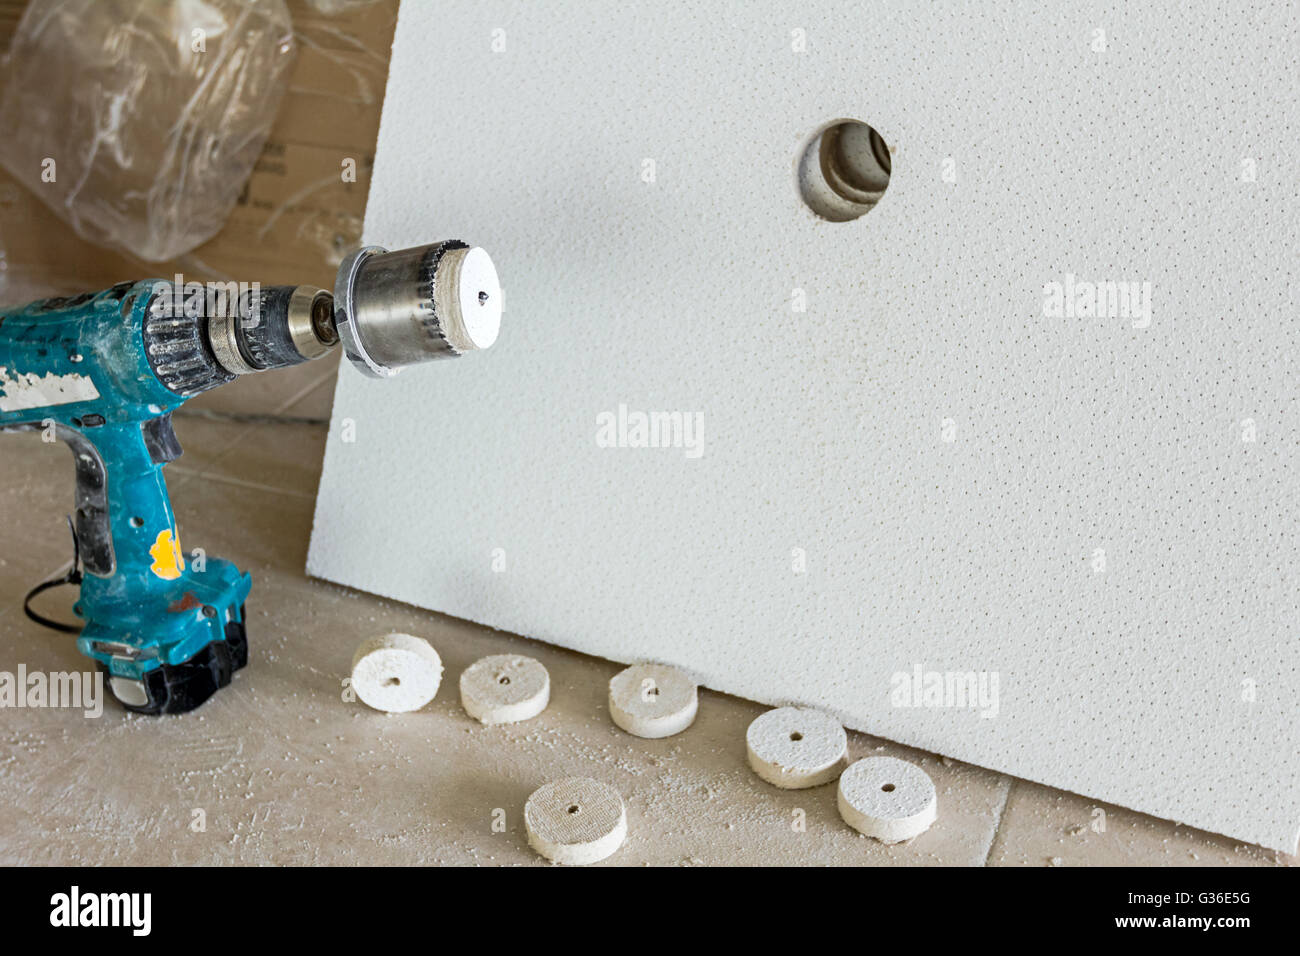 Precision drilling a hole with hole saw trough plasterboard. Stock Photo